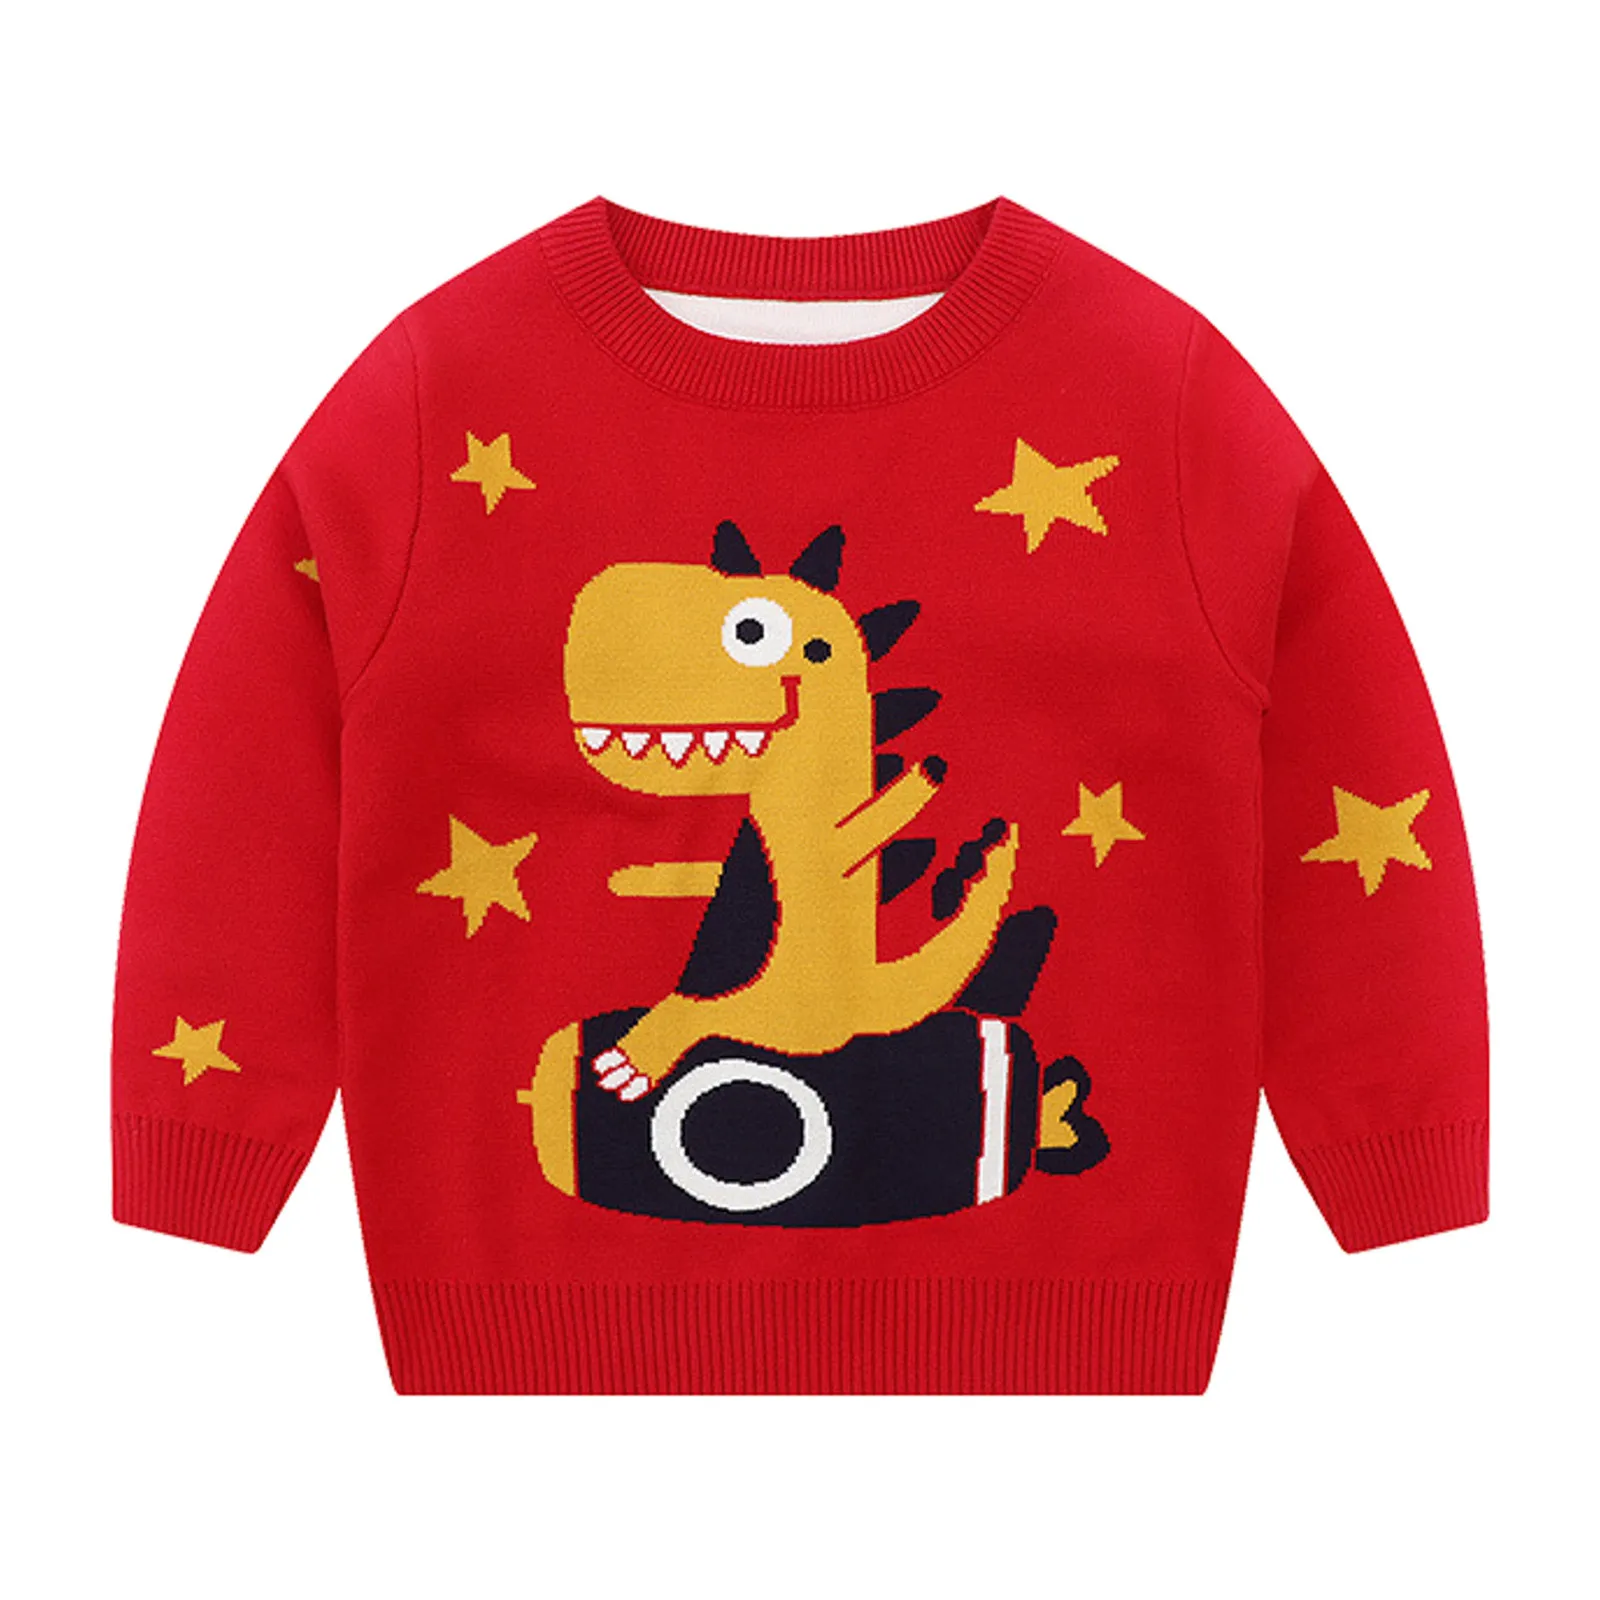 

2023 Autumn Winter New Baby Boys Sweater Jumper Cartoon Children Sweaters Toddler Pullovers Fashion Kids Clothes 1 2 3 4 5 6 7Y